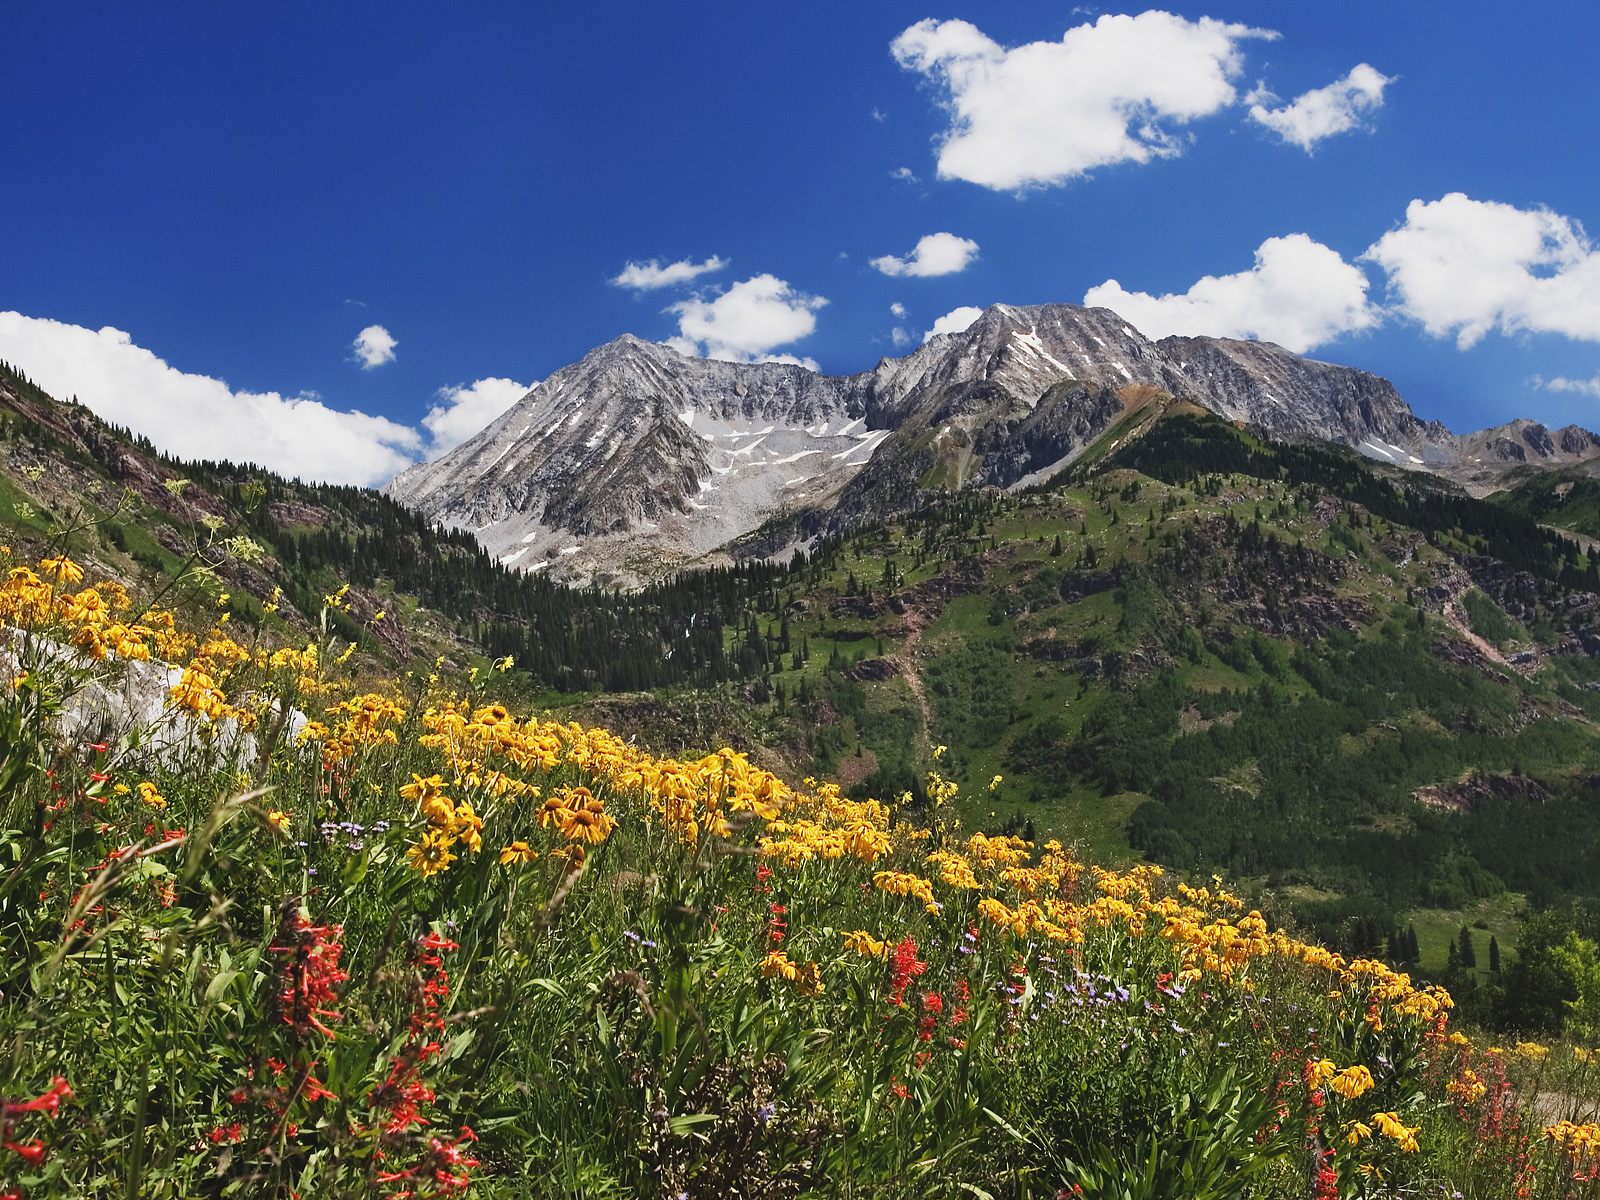 http://4.bp.blogspot.com/-un3A6xsPhNk/TbW1aXhXp8I/AAAAAAAACl4/AdhuH1H44Dw/s1600/Spring_Wildflowers_in_Alpine_Meadow_at_Lead_King_Basin.jpg